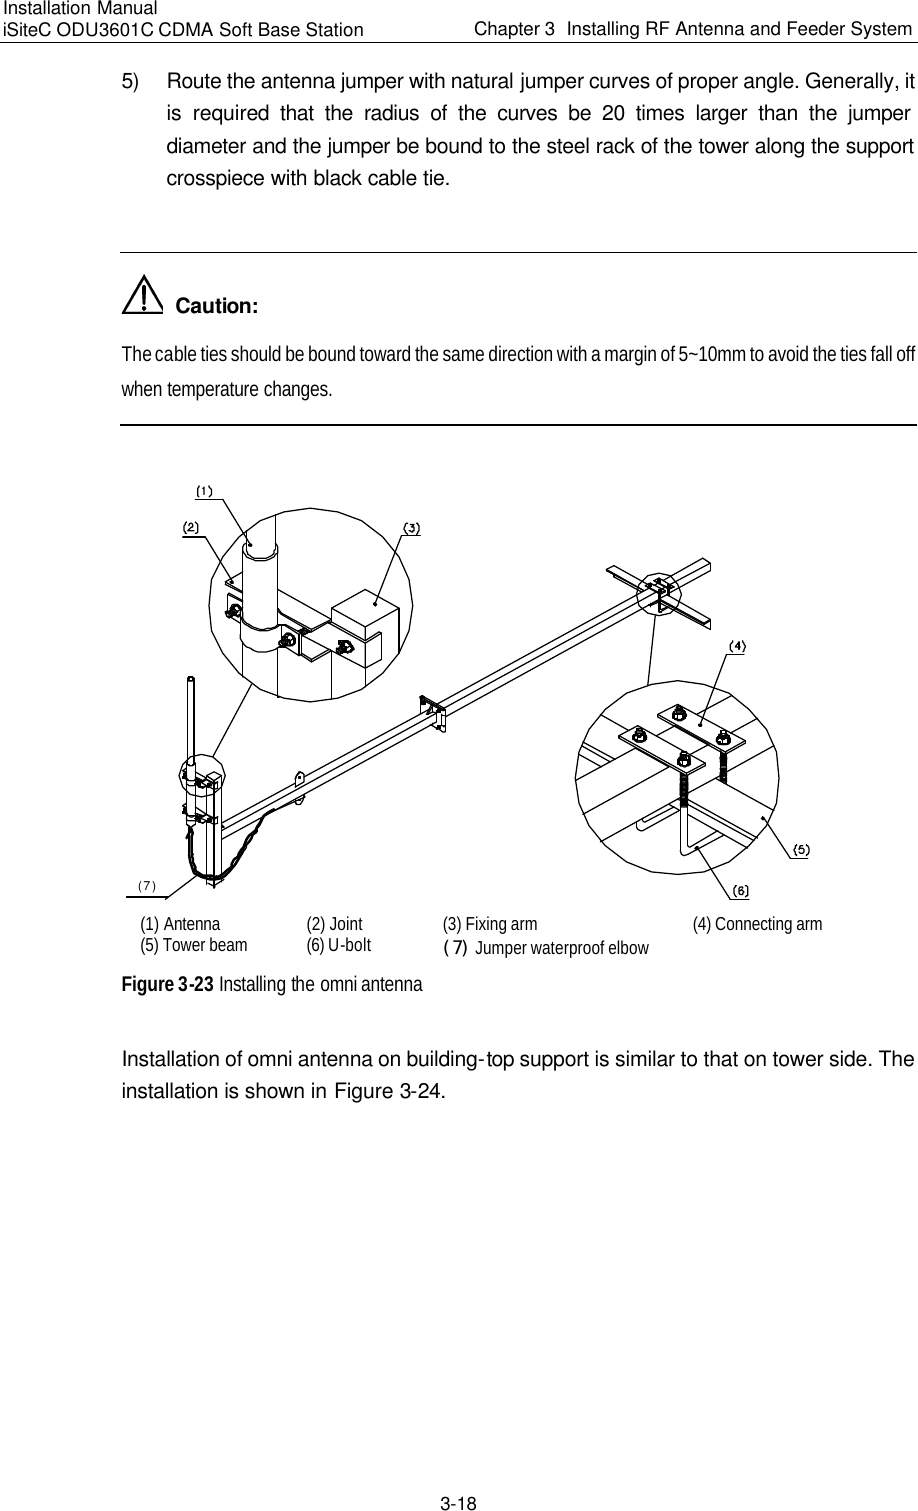 Installation Manual   iSiteC ODU3601C CDMA Soft Base Station Chapter 3  Installing RF Antenna and Feeder System  3-18 5) Route the antenna jumper with natural jumper curves of proper angle. Generally, it is required that the radius of the curves be 20 times larger than the jumper diameter and the jumper be bound to the steel rack of the tower along the support crosspiece with black cable tie.    Caution: The cable ties should be bound toward the same direction with a margin of 5~10mm to avoid the ties fall off when temperature changes.  (7)  (1) Antenna (2) Joint (3) Fixing arm (4) Connecting arm (5) Tower beam (6) U-bolt （７） Jumper waterproof elbow  Figure 3-23 Installing the omni antenna Installation of omni antenna on building-top support is similar to that on tower side. The installation is shown in Figure 3-24. 